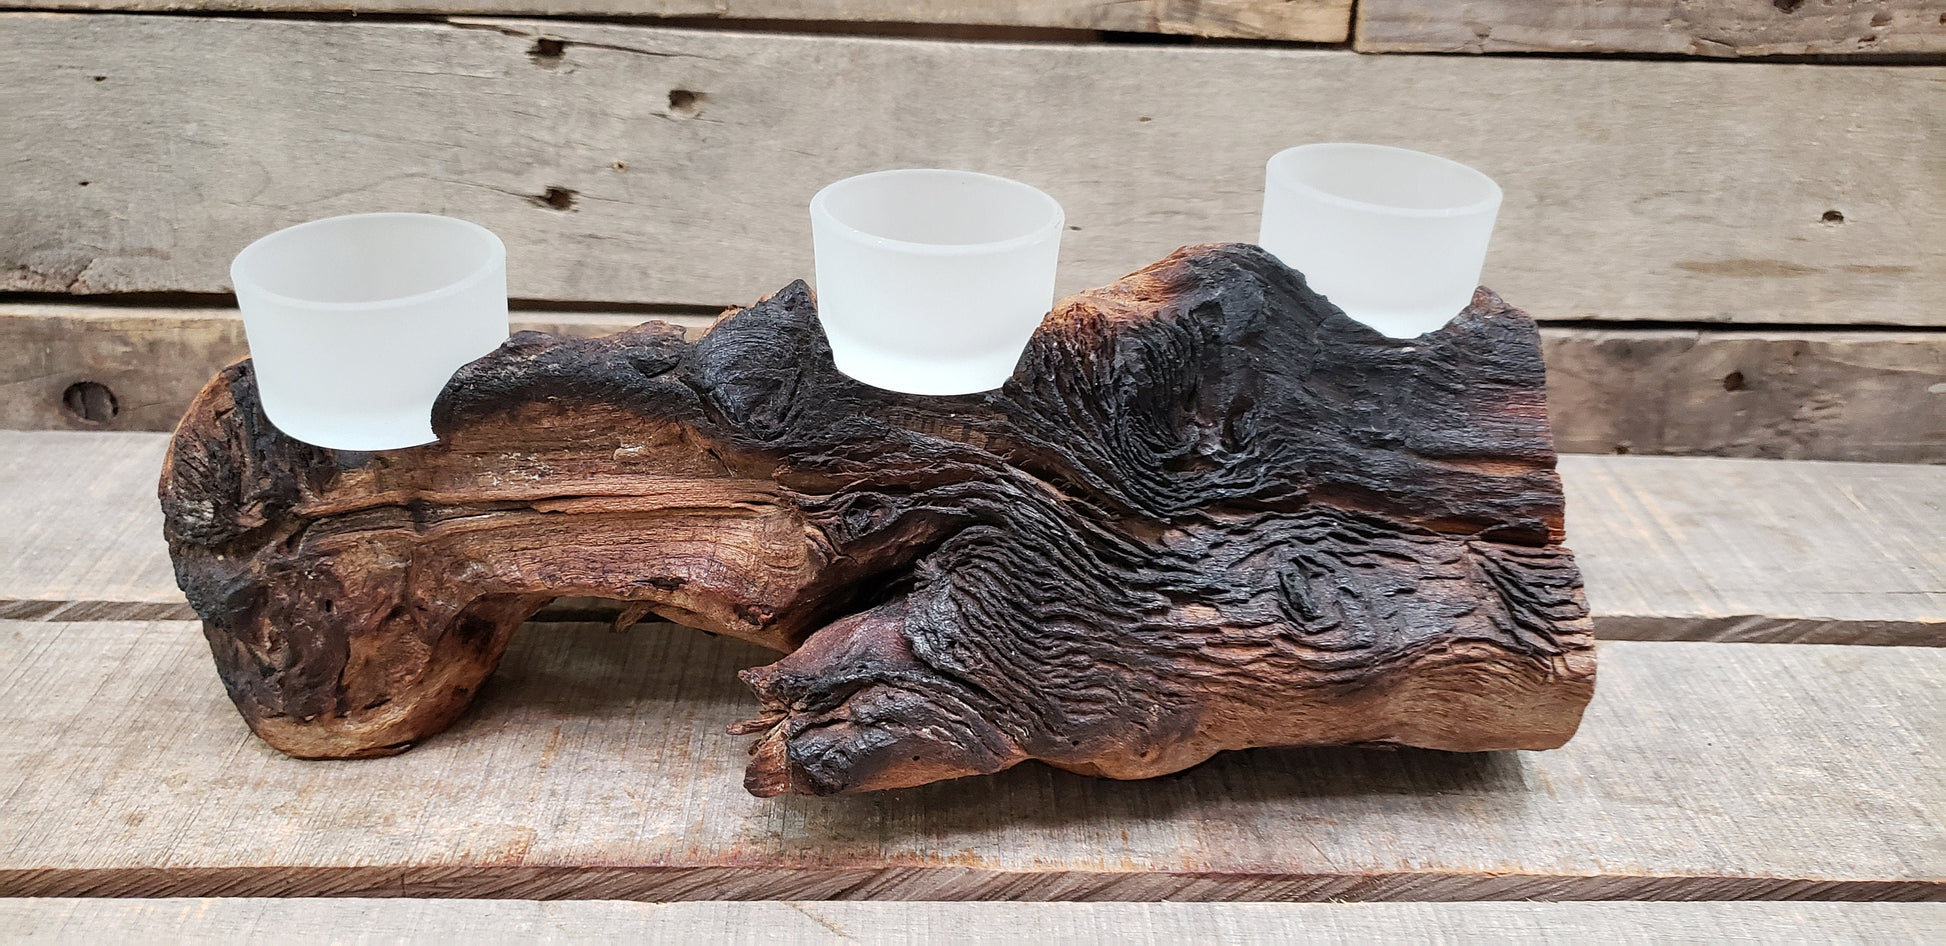 Grapevine Candle Holder 0339 Made from retired Stags Leap Cabernet grapevines - 100% Recycled!